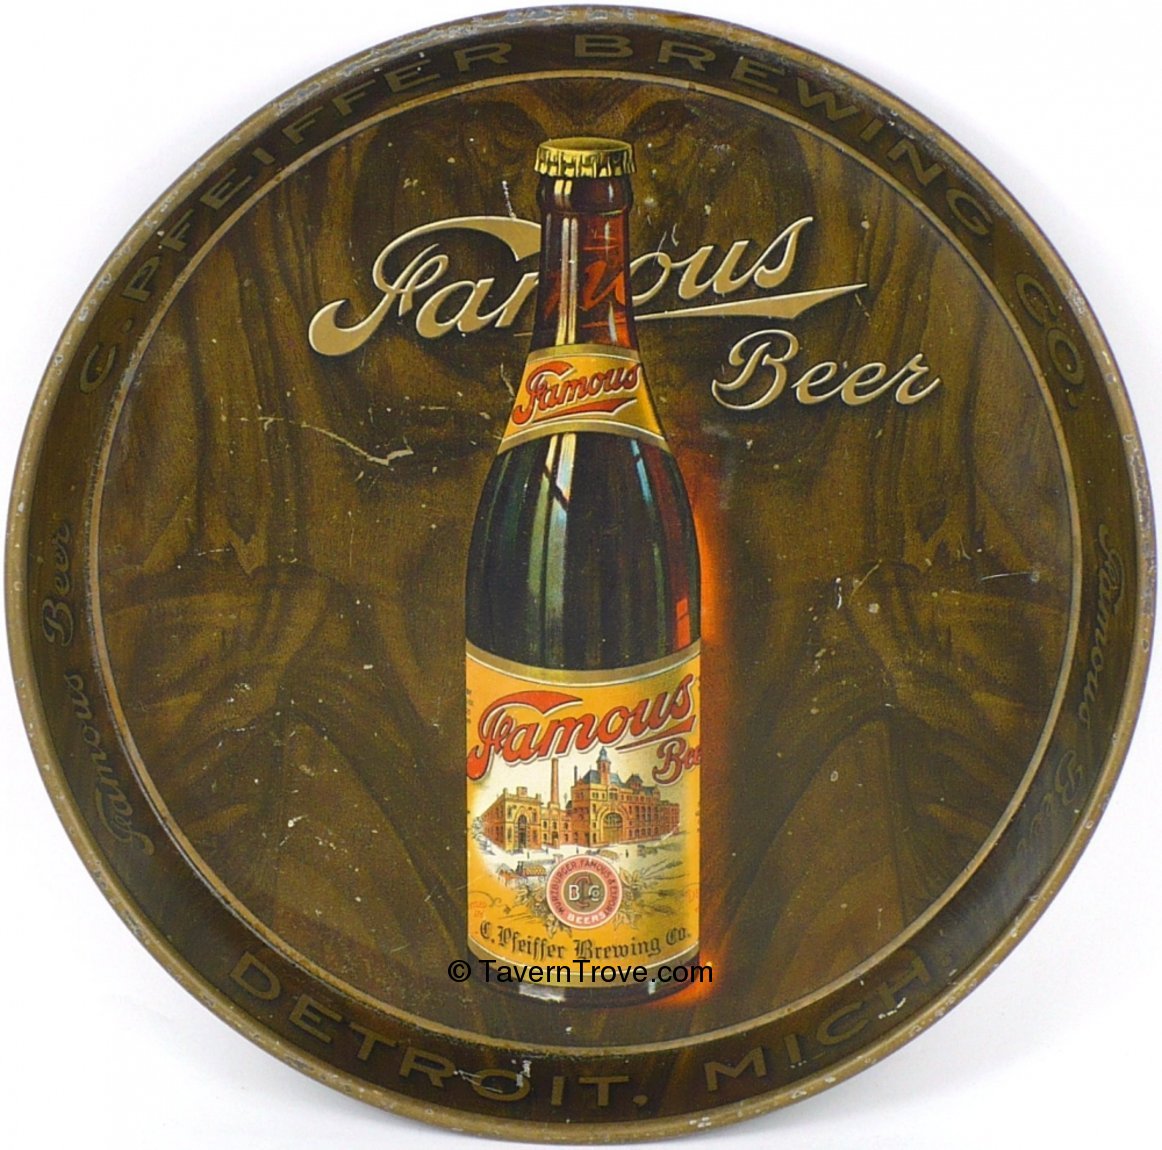 https://www.taverntrove.com/imagecache/pfeiffers-famous-beer-serving-trays-10-16-inches-c-pfeiffer-brewing-co_89767-1.jpg_H1162.jpg